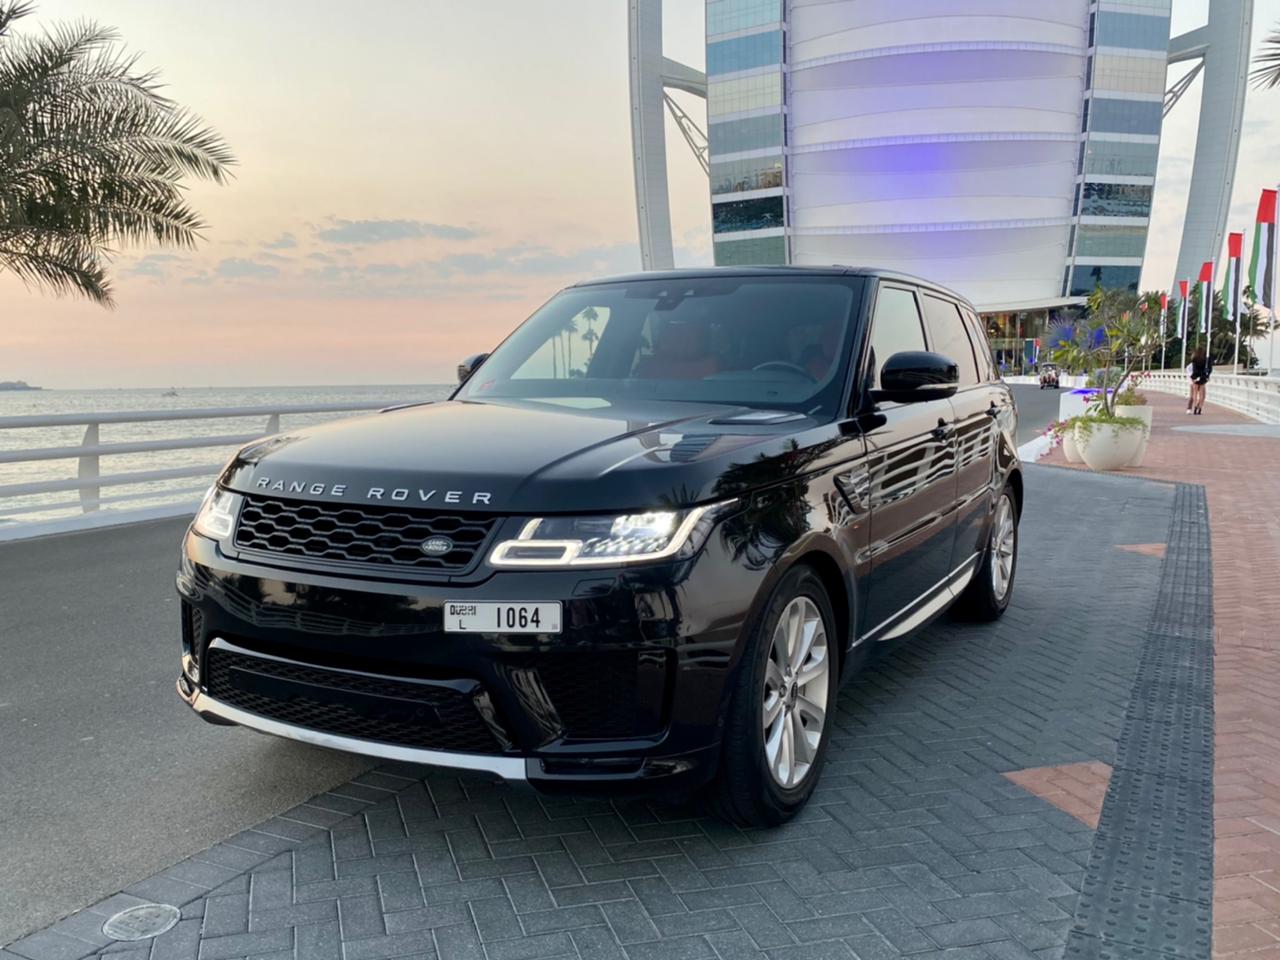 LAND ROVER RANGE ROVER 2019 Listed By Class Cars Rental